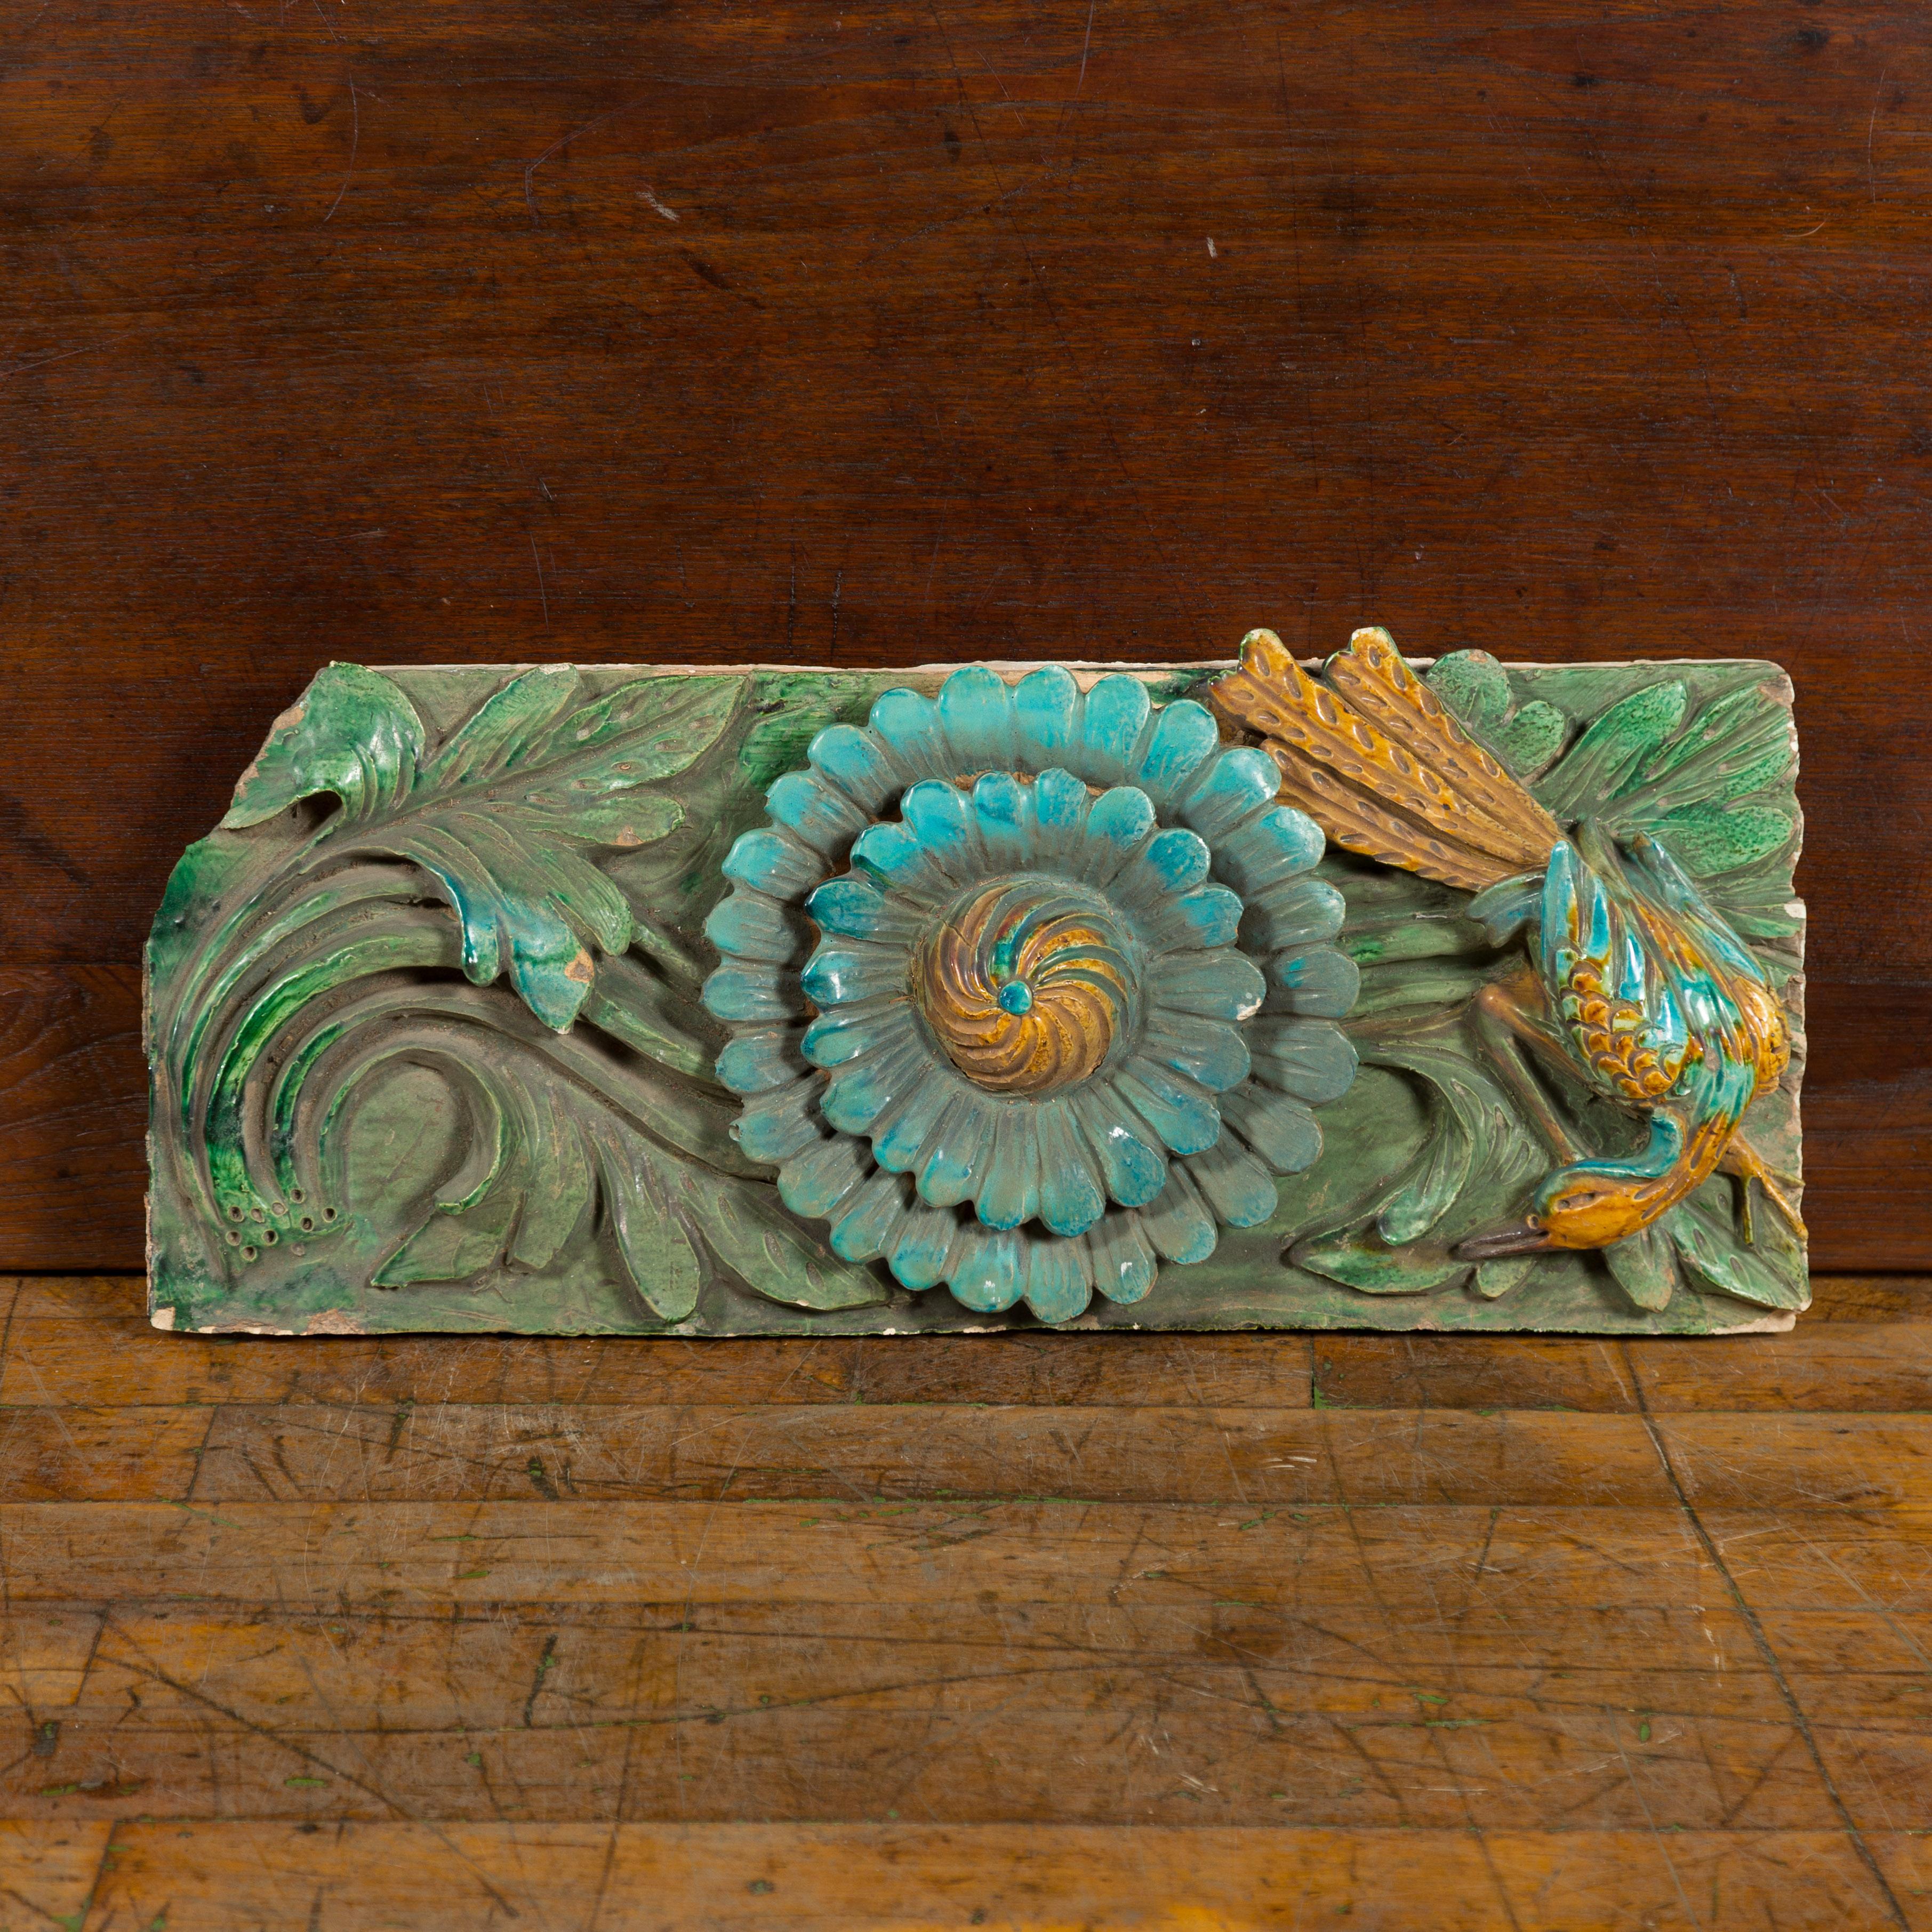 A Chinese Ming Dynasty period temple roof tile from the 17th century, with turquoise finish, bird and flower. Created in China during the Ming Dynasty (1368-1644), this ancient temple roof tile was made from molded terracotta and painted. Showcasing